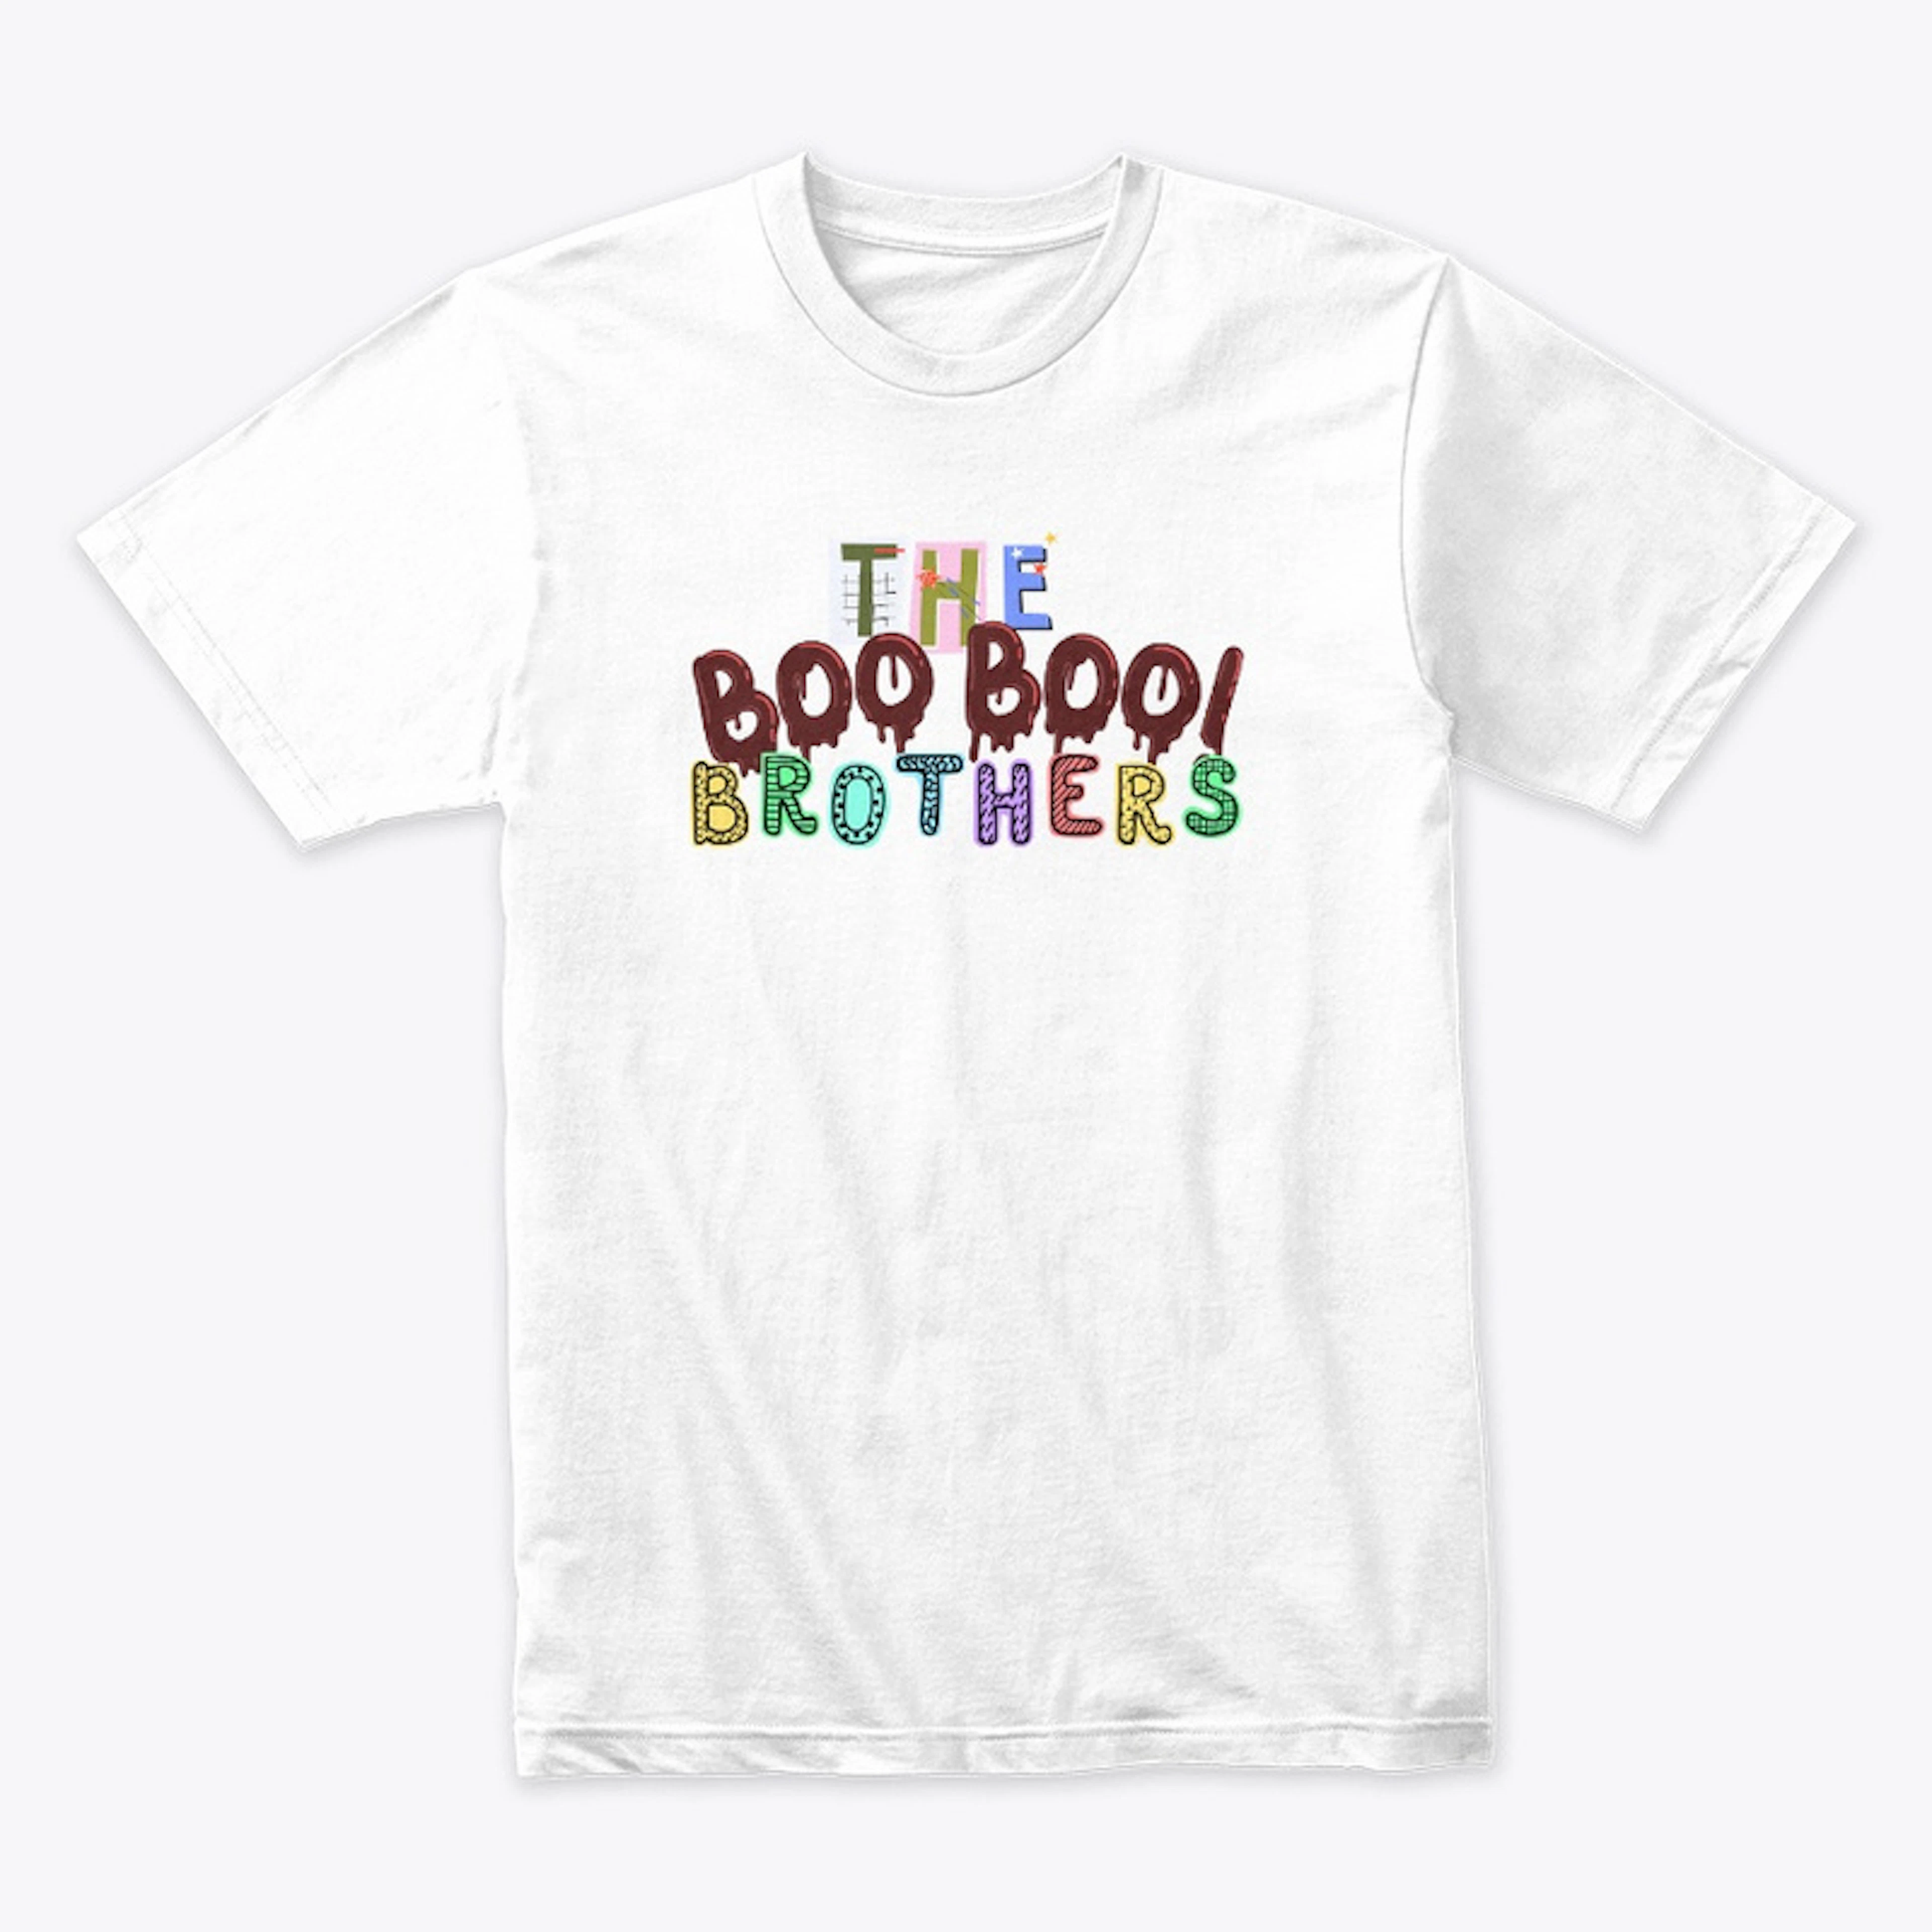 The Boo Boo Brothers Collections